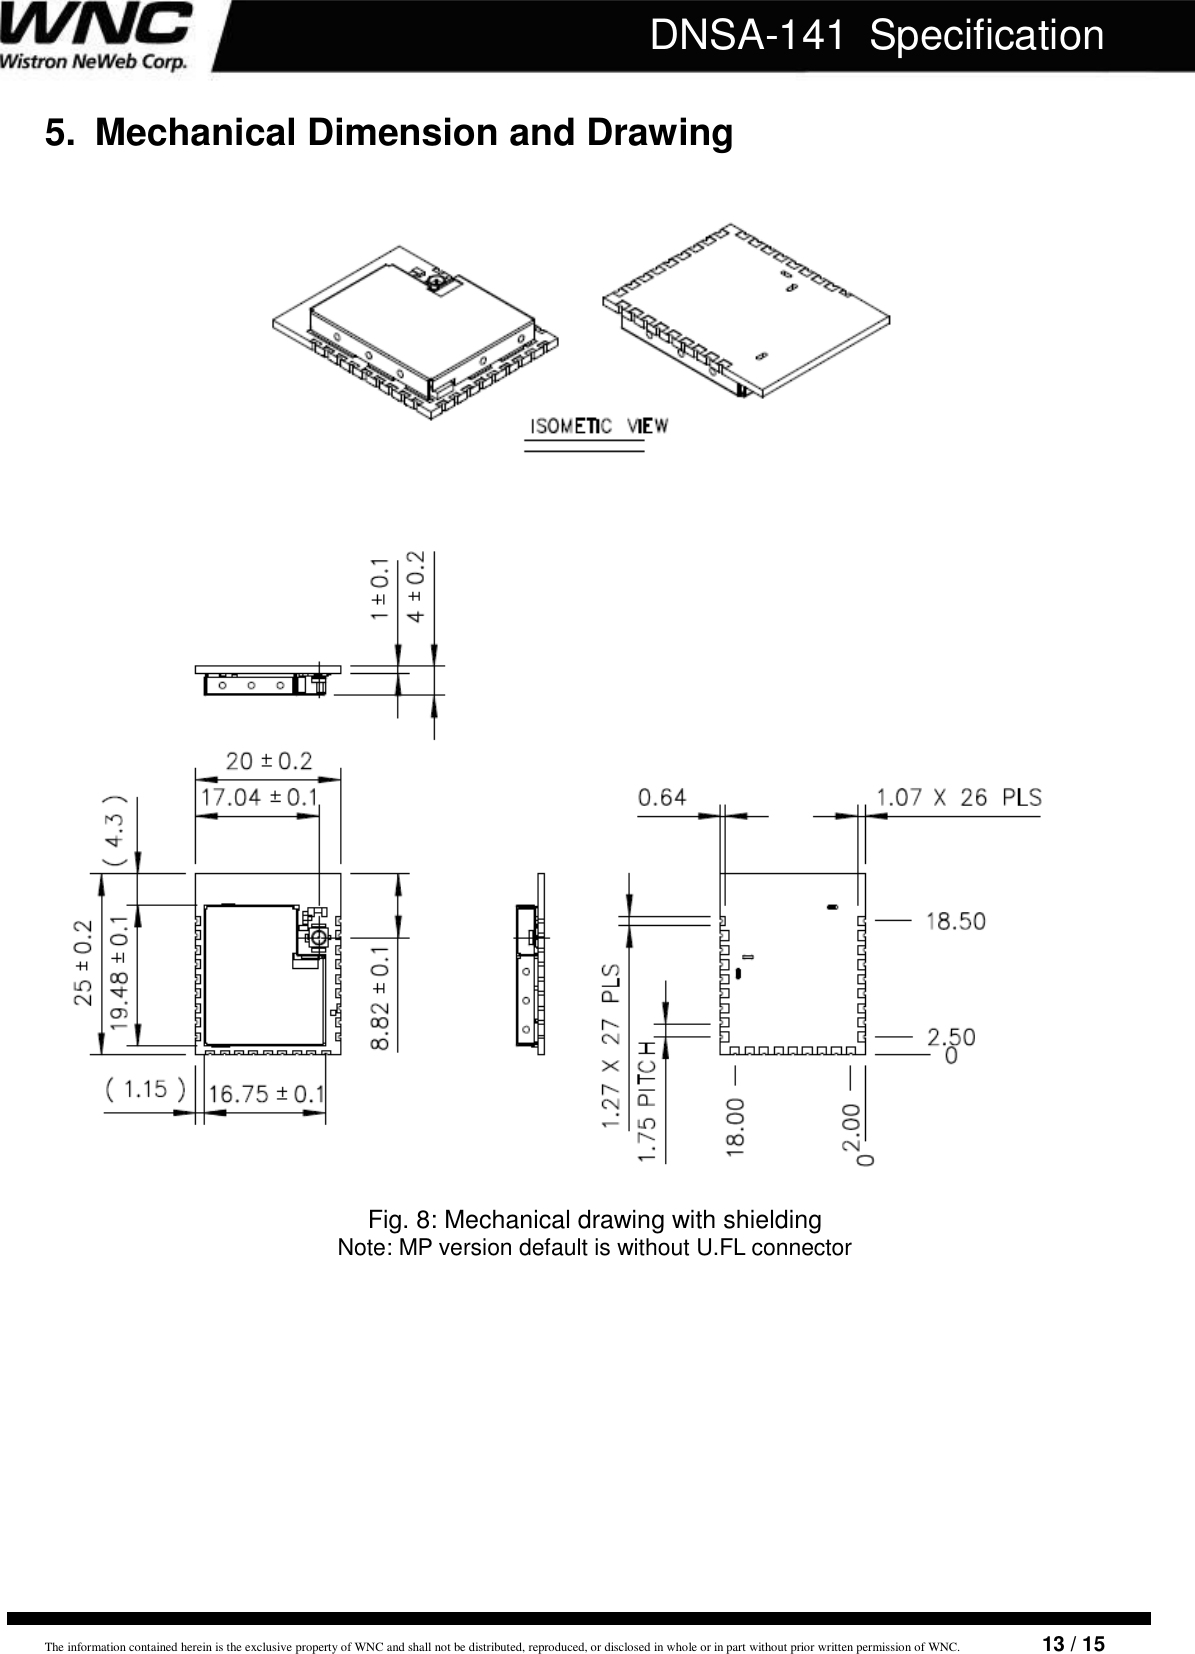   The information contained herein is the exclusive property of WNC and shall not be distributed, reproduced, or disclosed in whole or in part without prior written permission of WNC.                        13 / 15 DNSA-141  Specification 5.  Mechanical Dimension and Drawing                  Fig. 8: Mechanical drawing with shielding Note: MP version default is without U.FL connector              